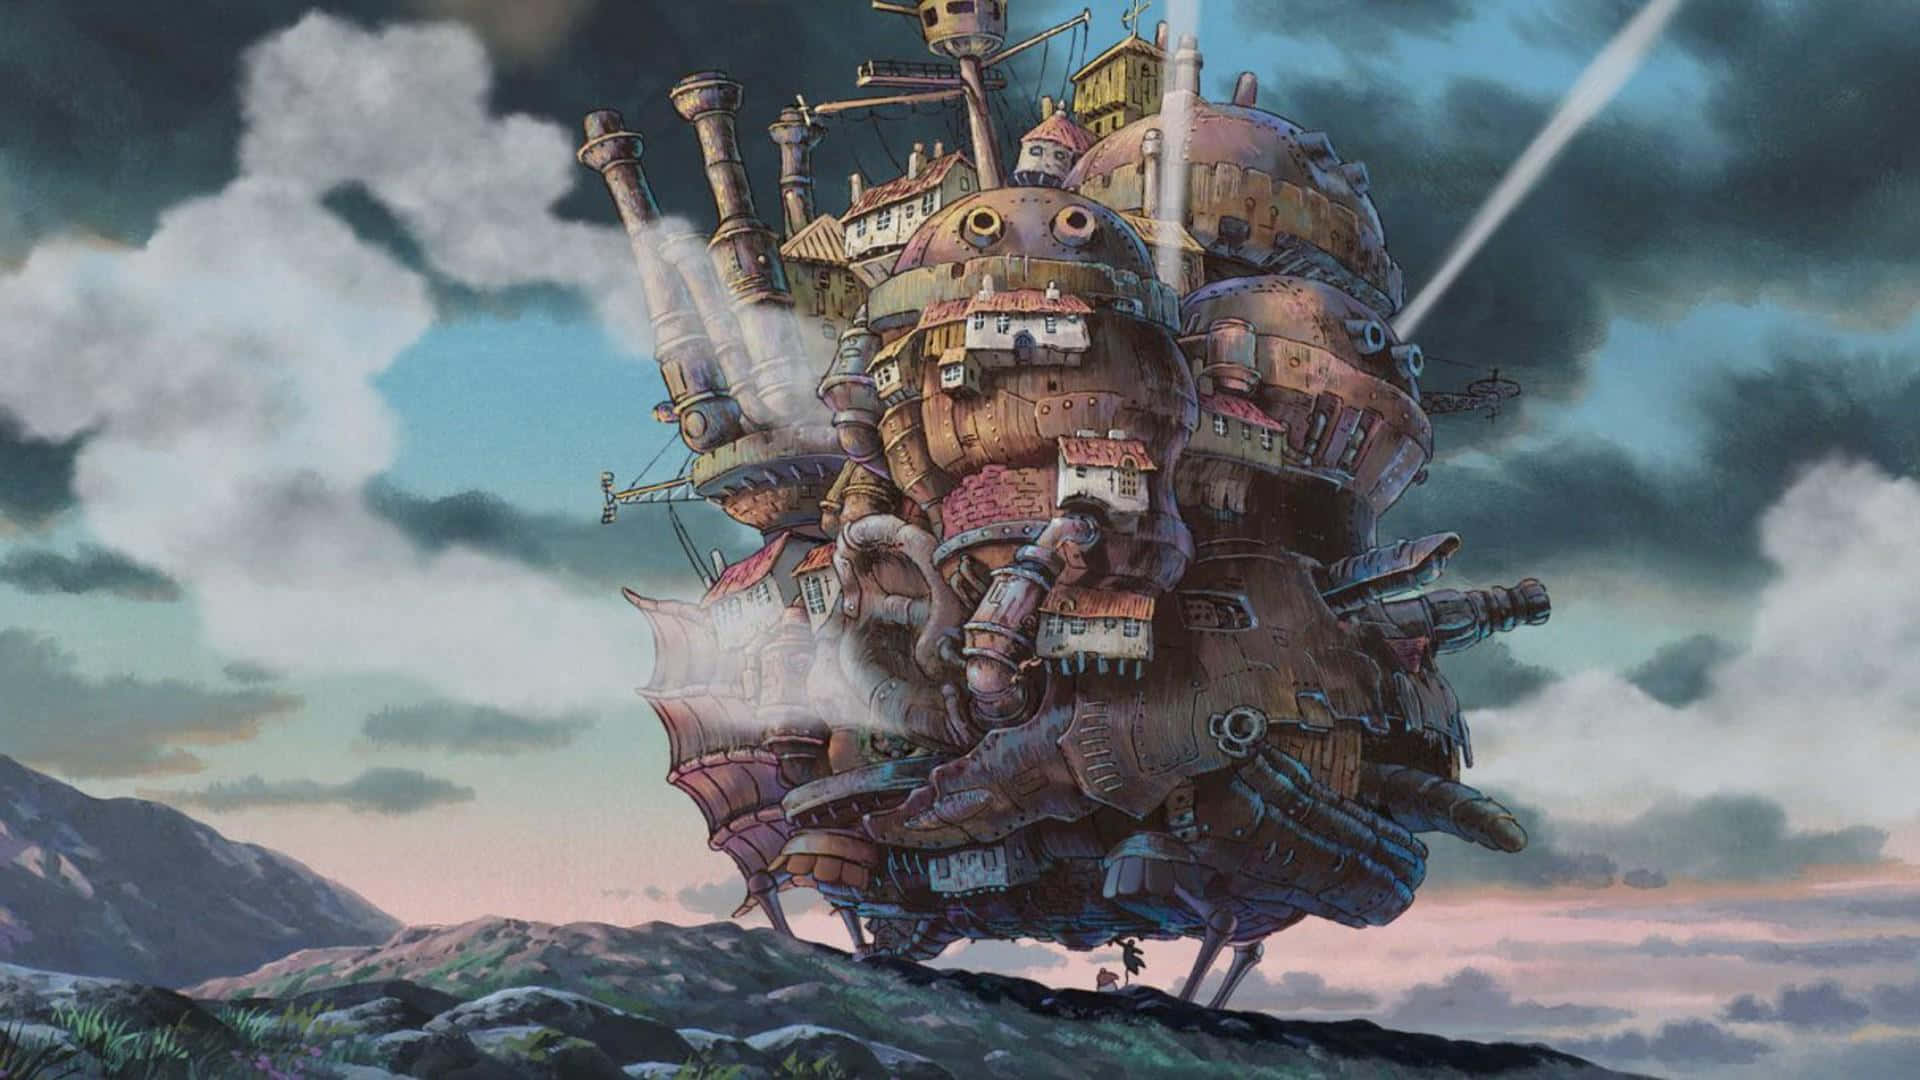 Time to travel to the magical world of Ghibli Wallpaper